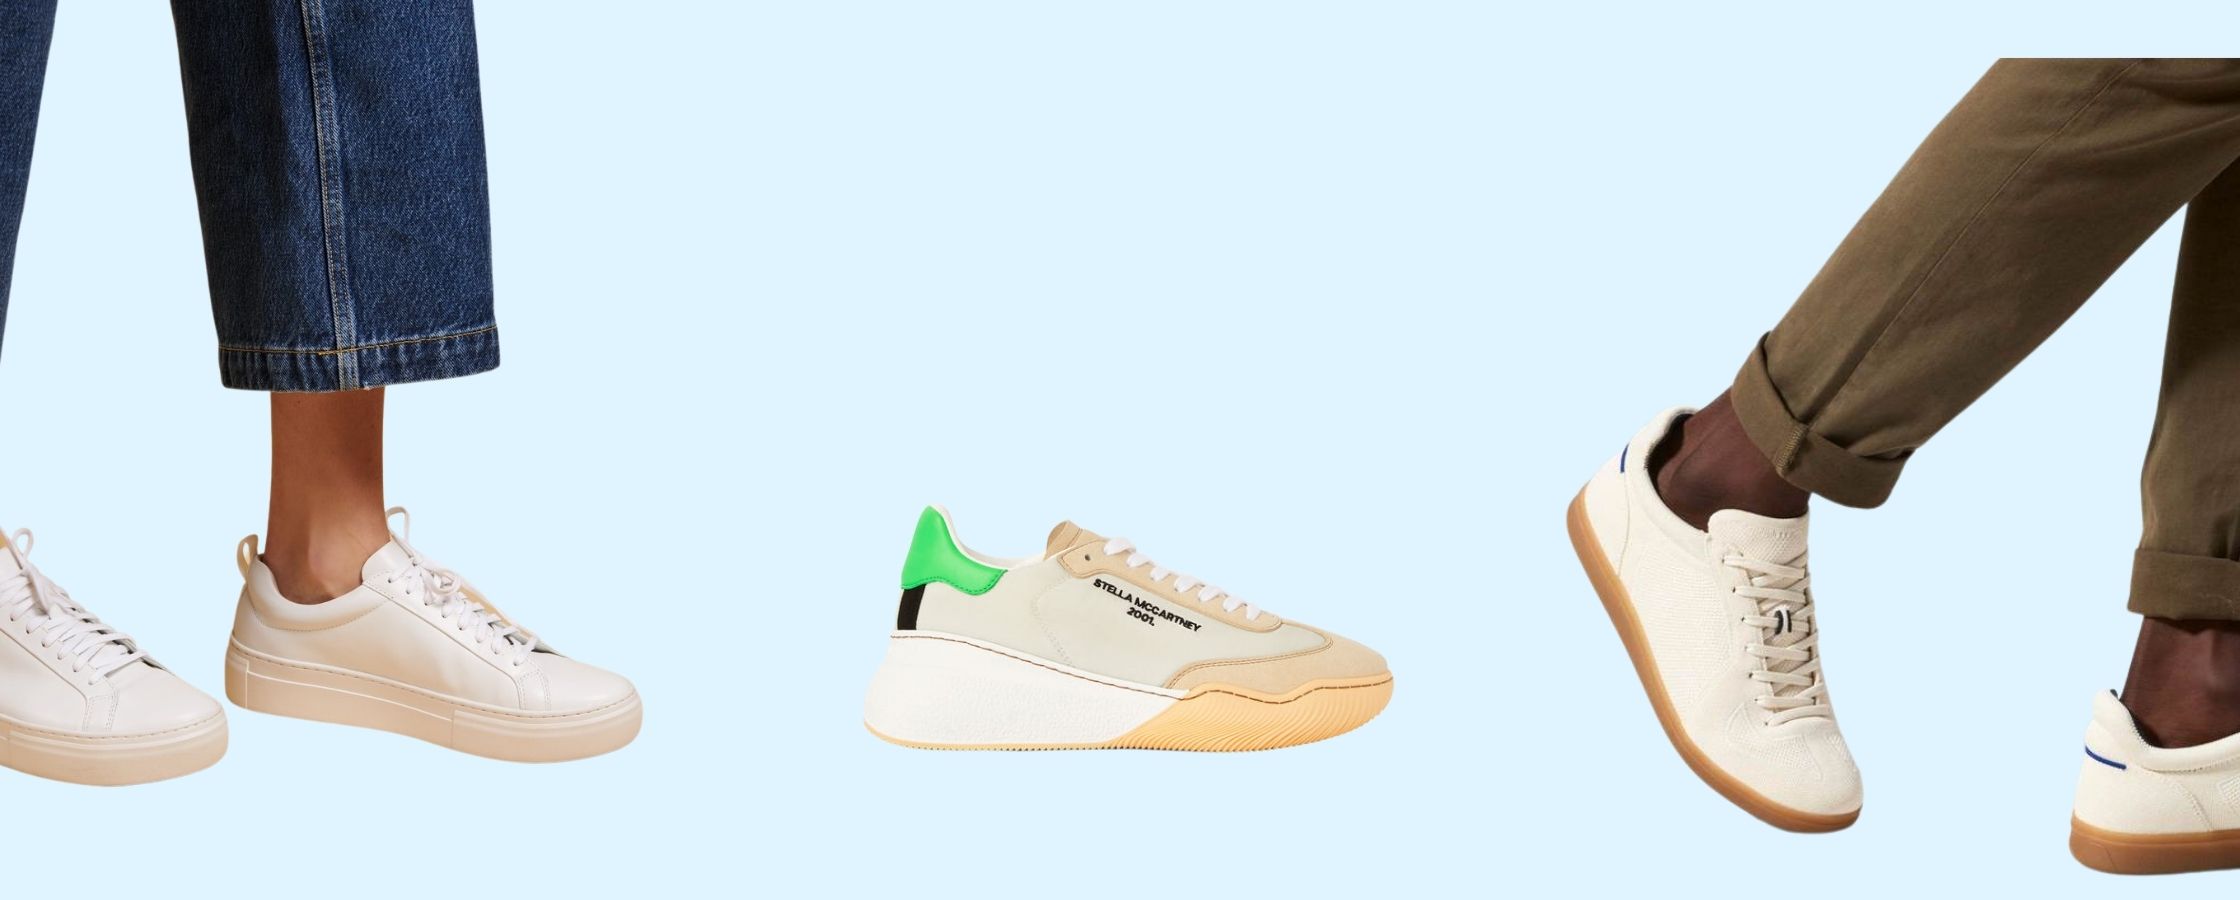 20 Sustainable Sneaker Brands To Shop in 2022